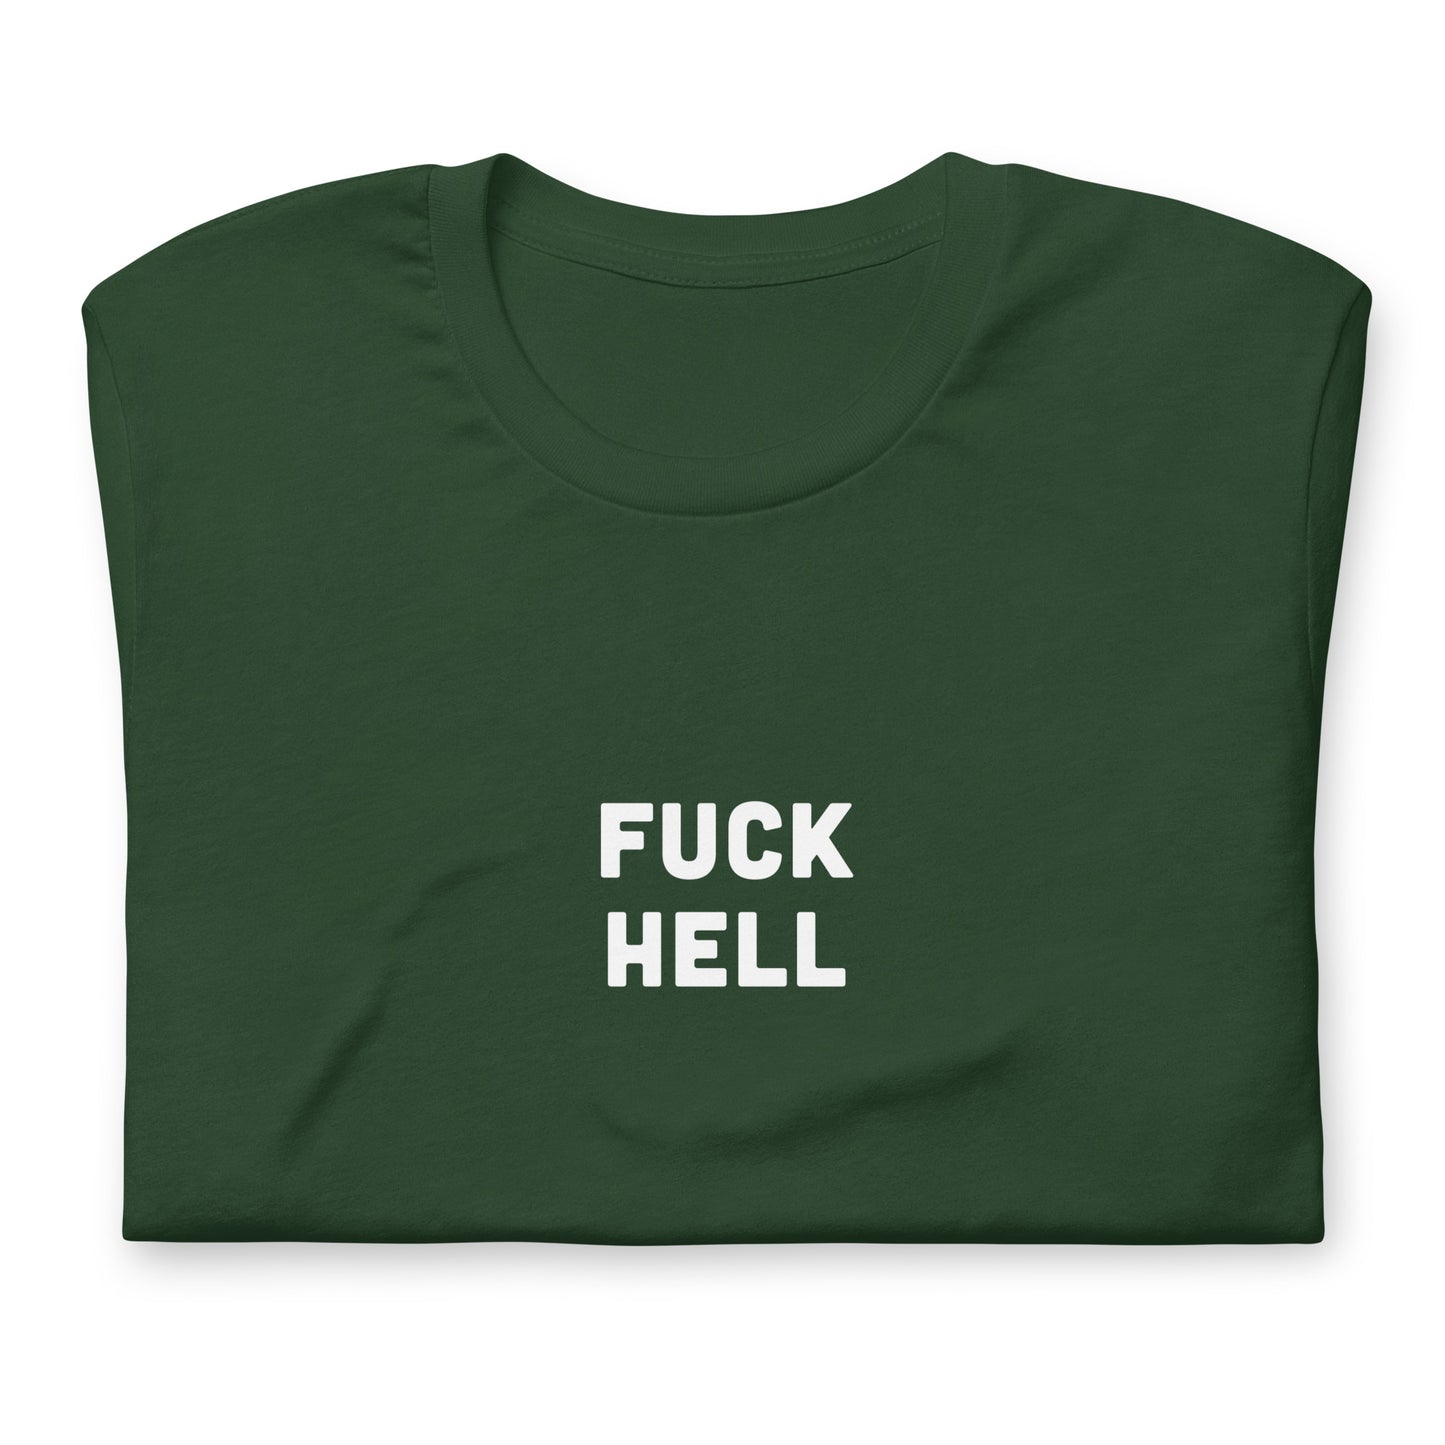 Fuck Hell T-Shirt Size XL Color Black